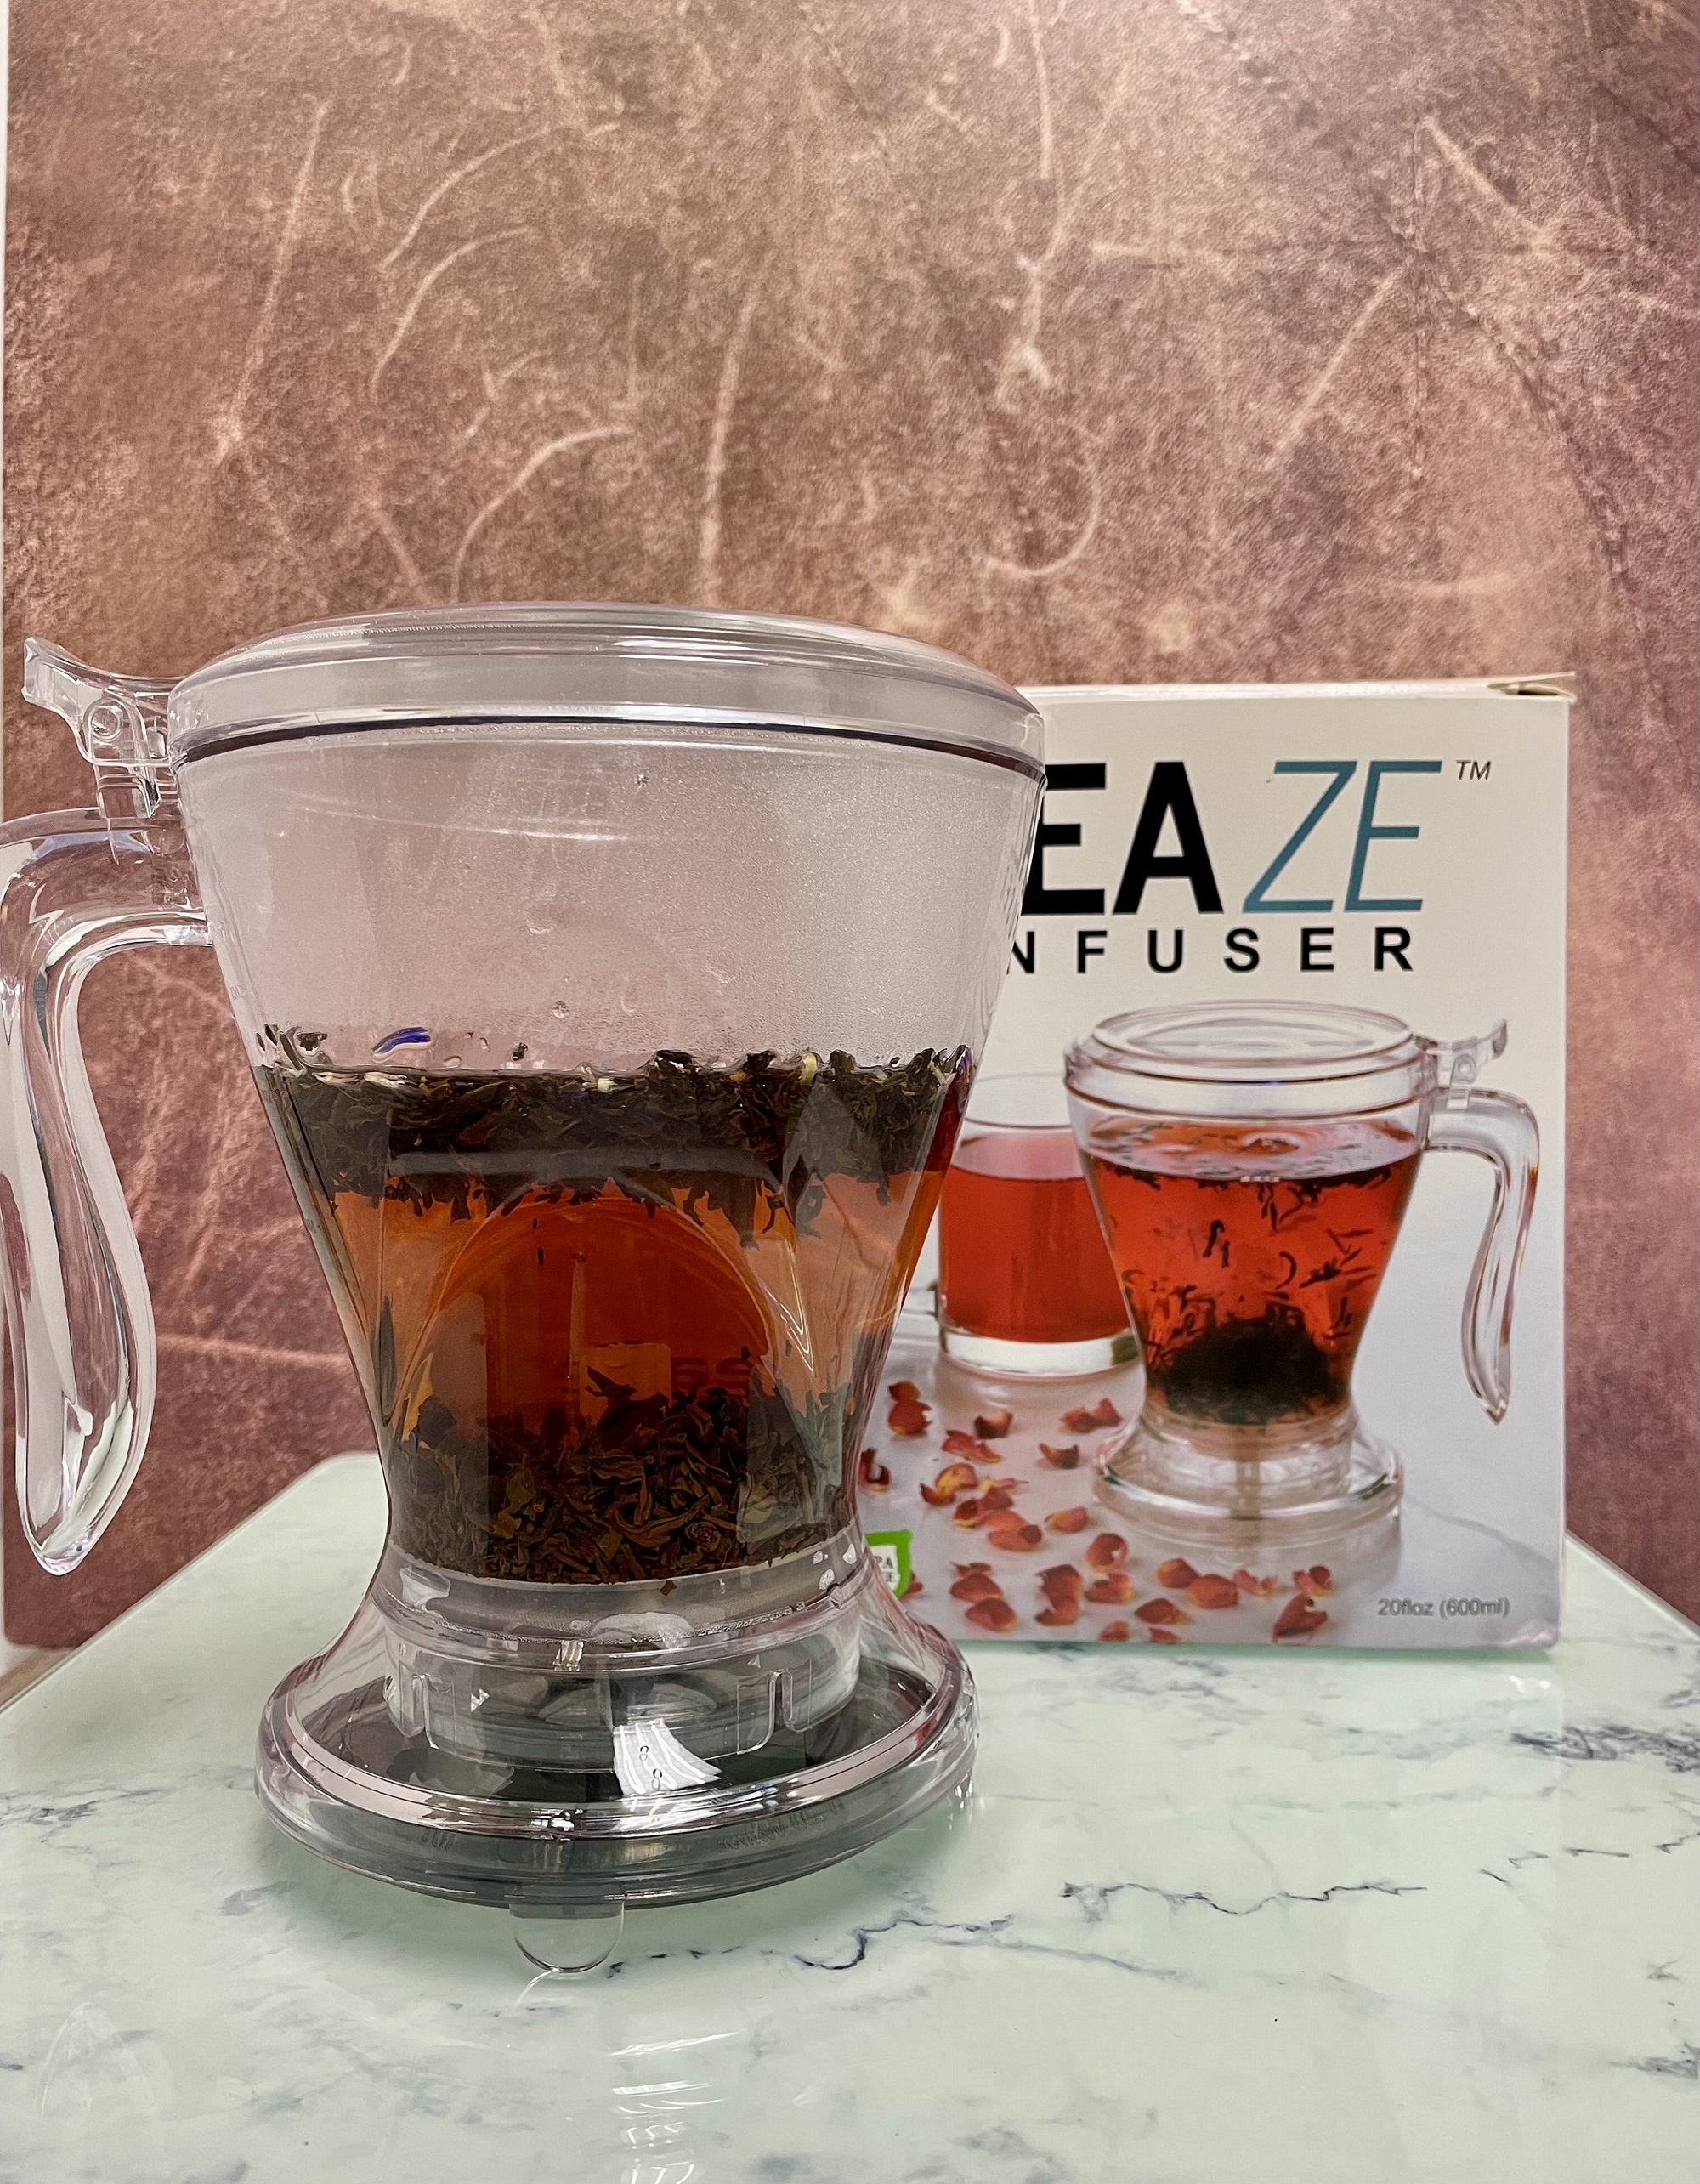 How to Steep Loose Leaf Tea with TEAZE Infuser Royal Cup Coffee